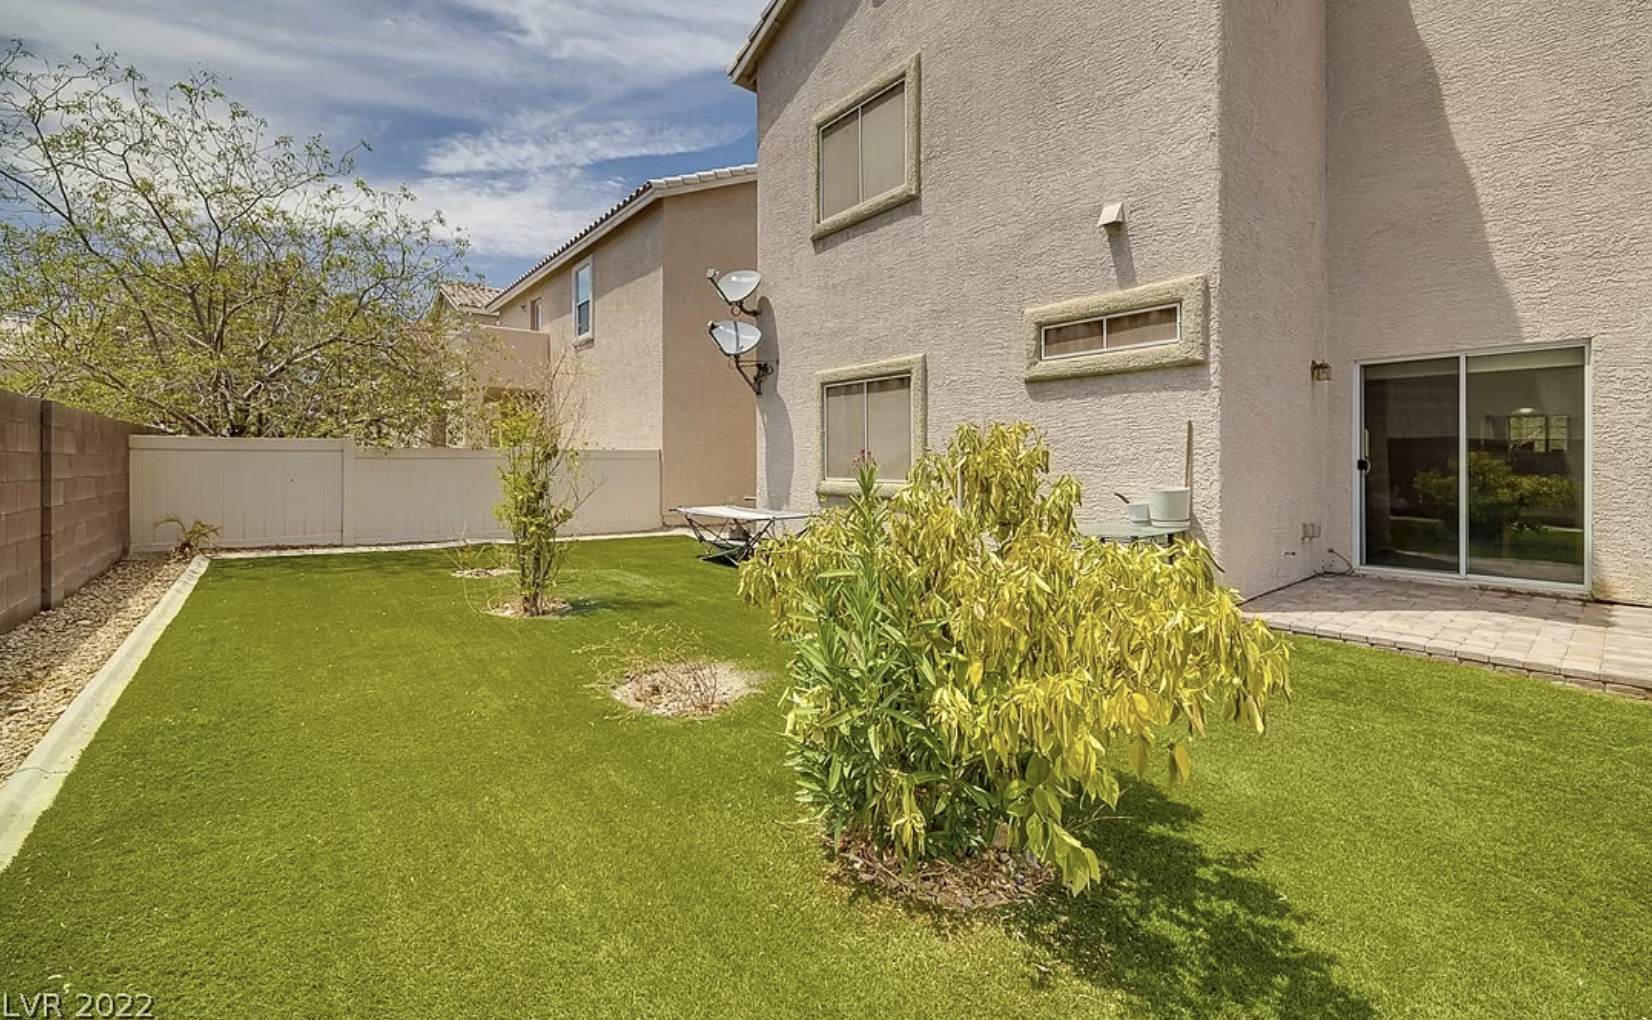 The bright green back yard of a large, beige home with several small green trees